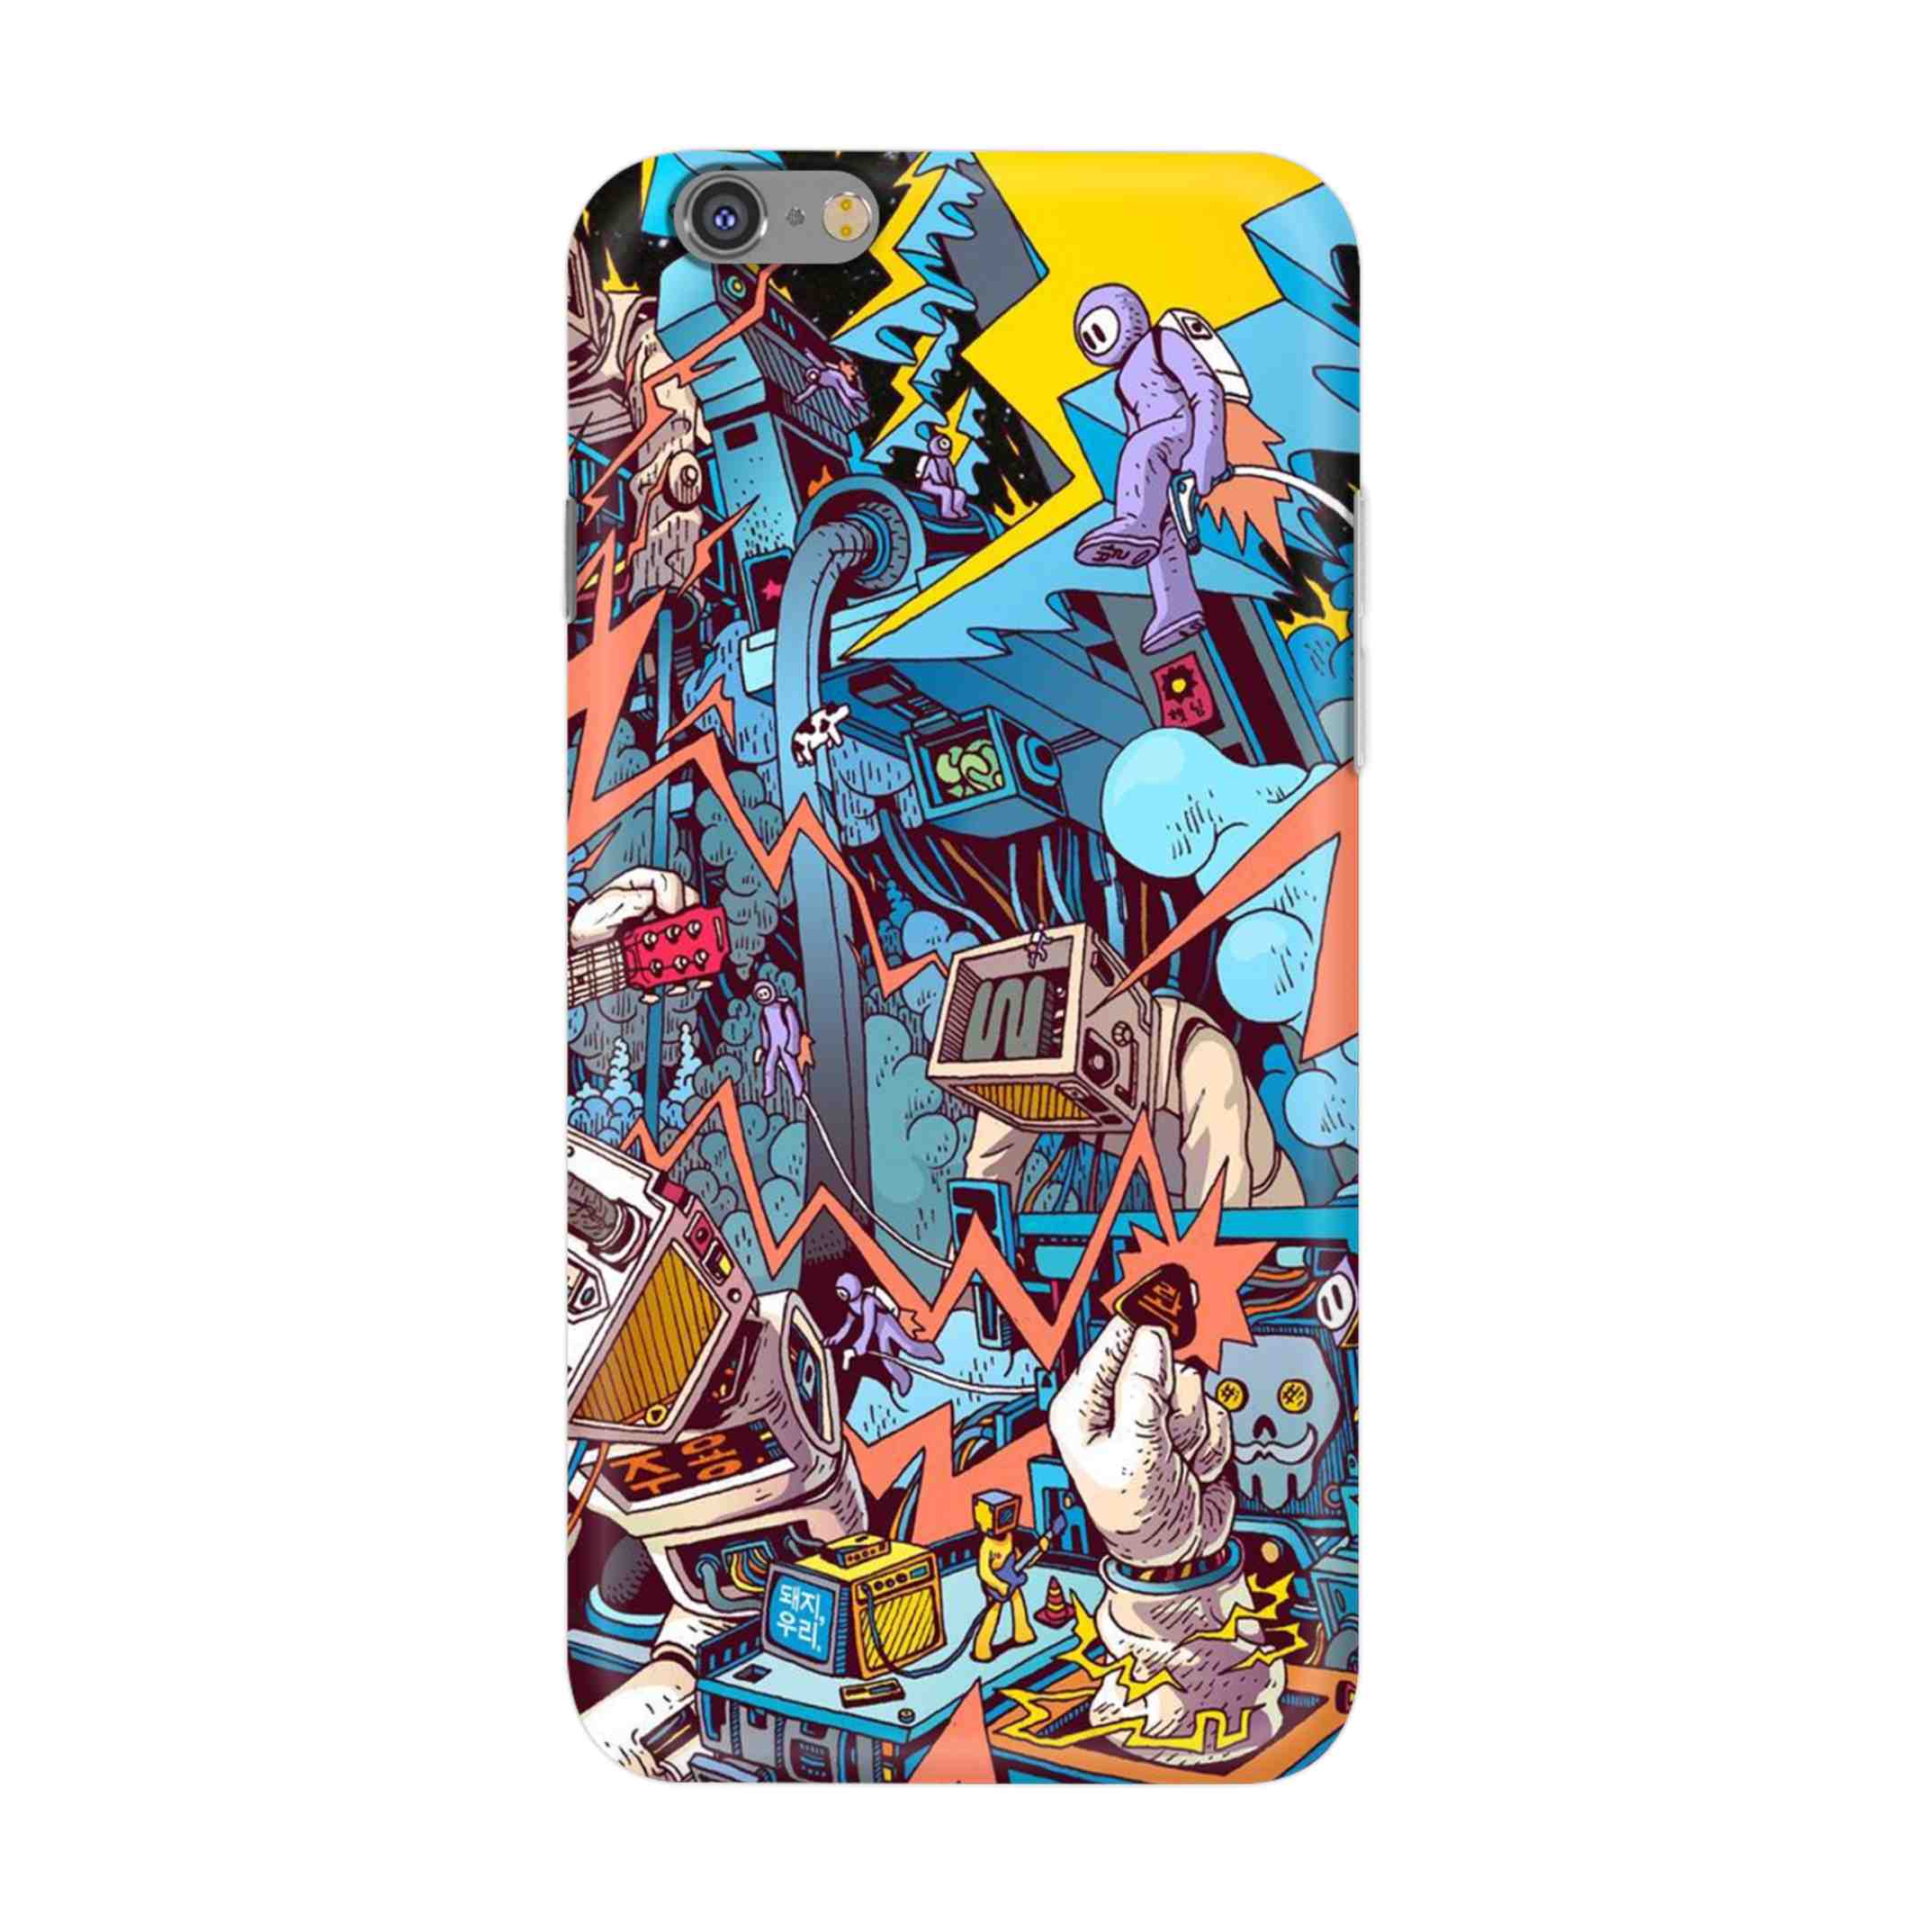 Buy Ofo Panic Hard Back Mobile Phone Case/Cover For iPhone 6 / 6s Online